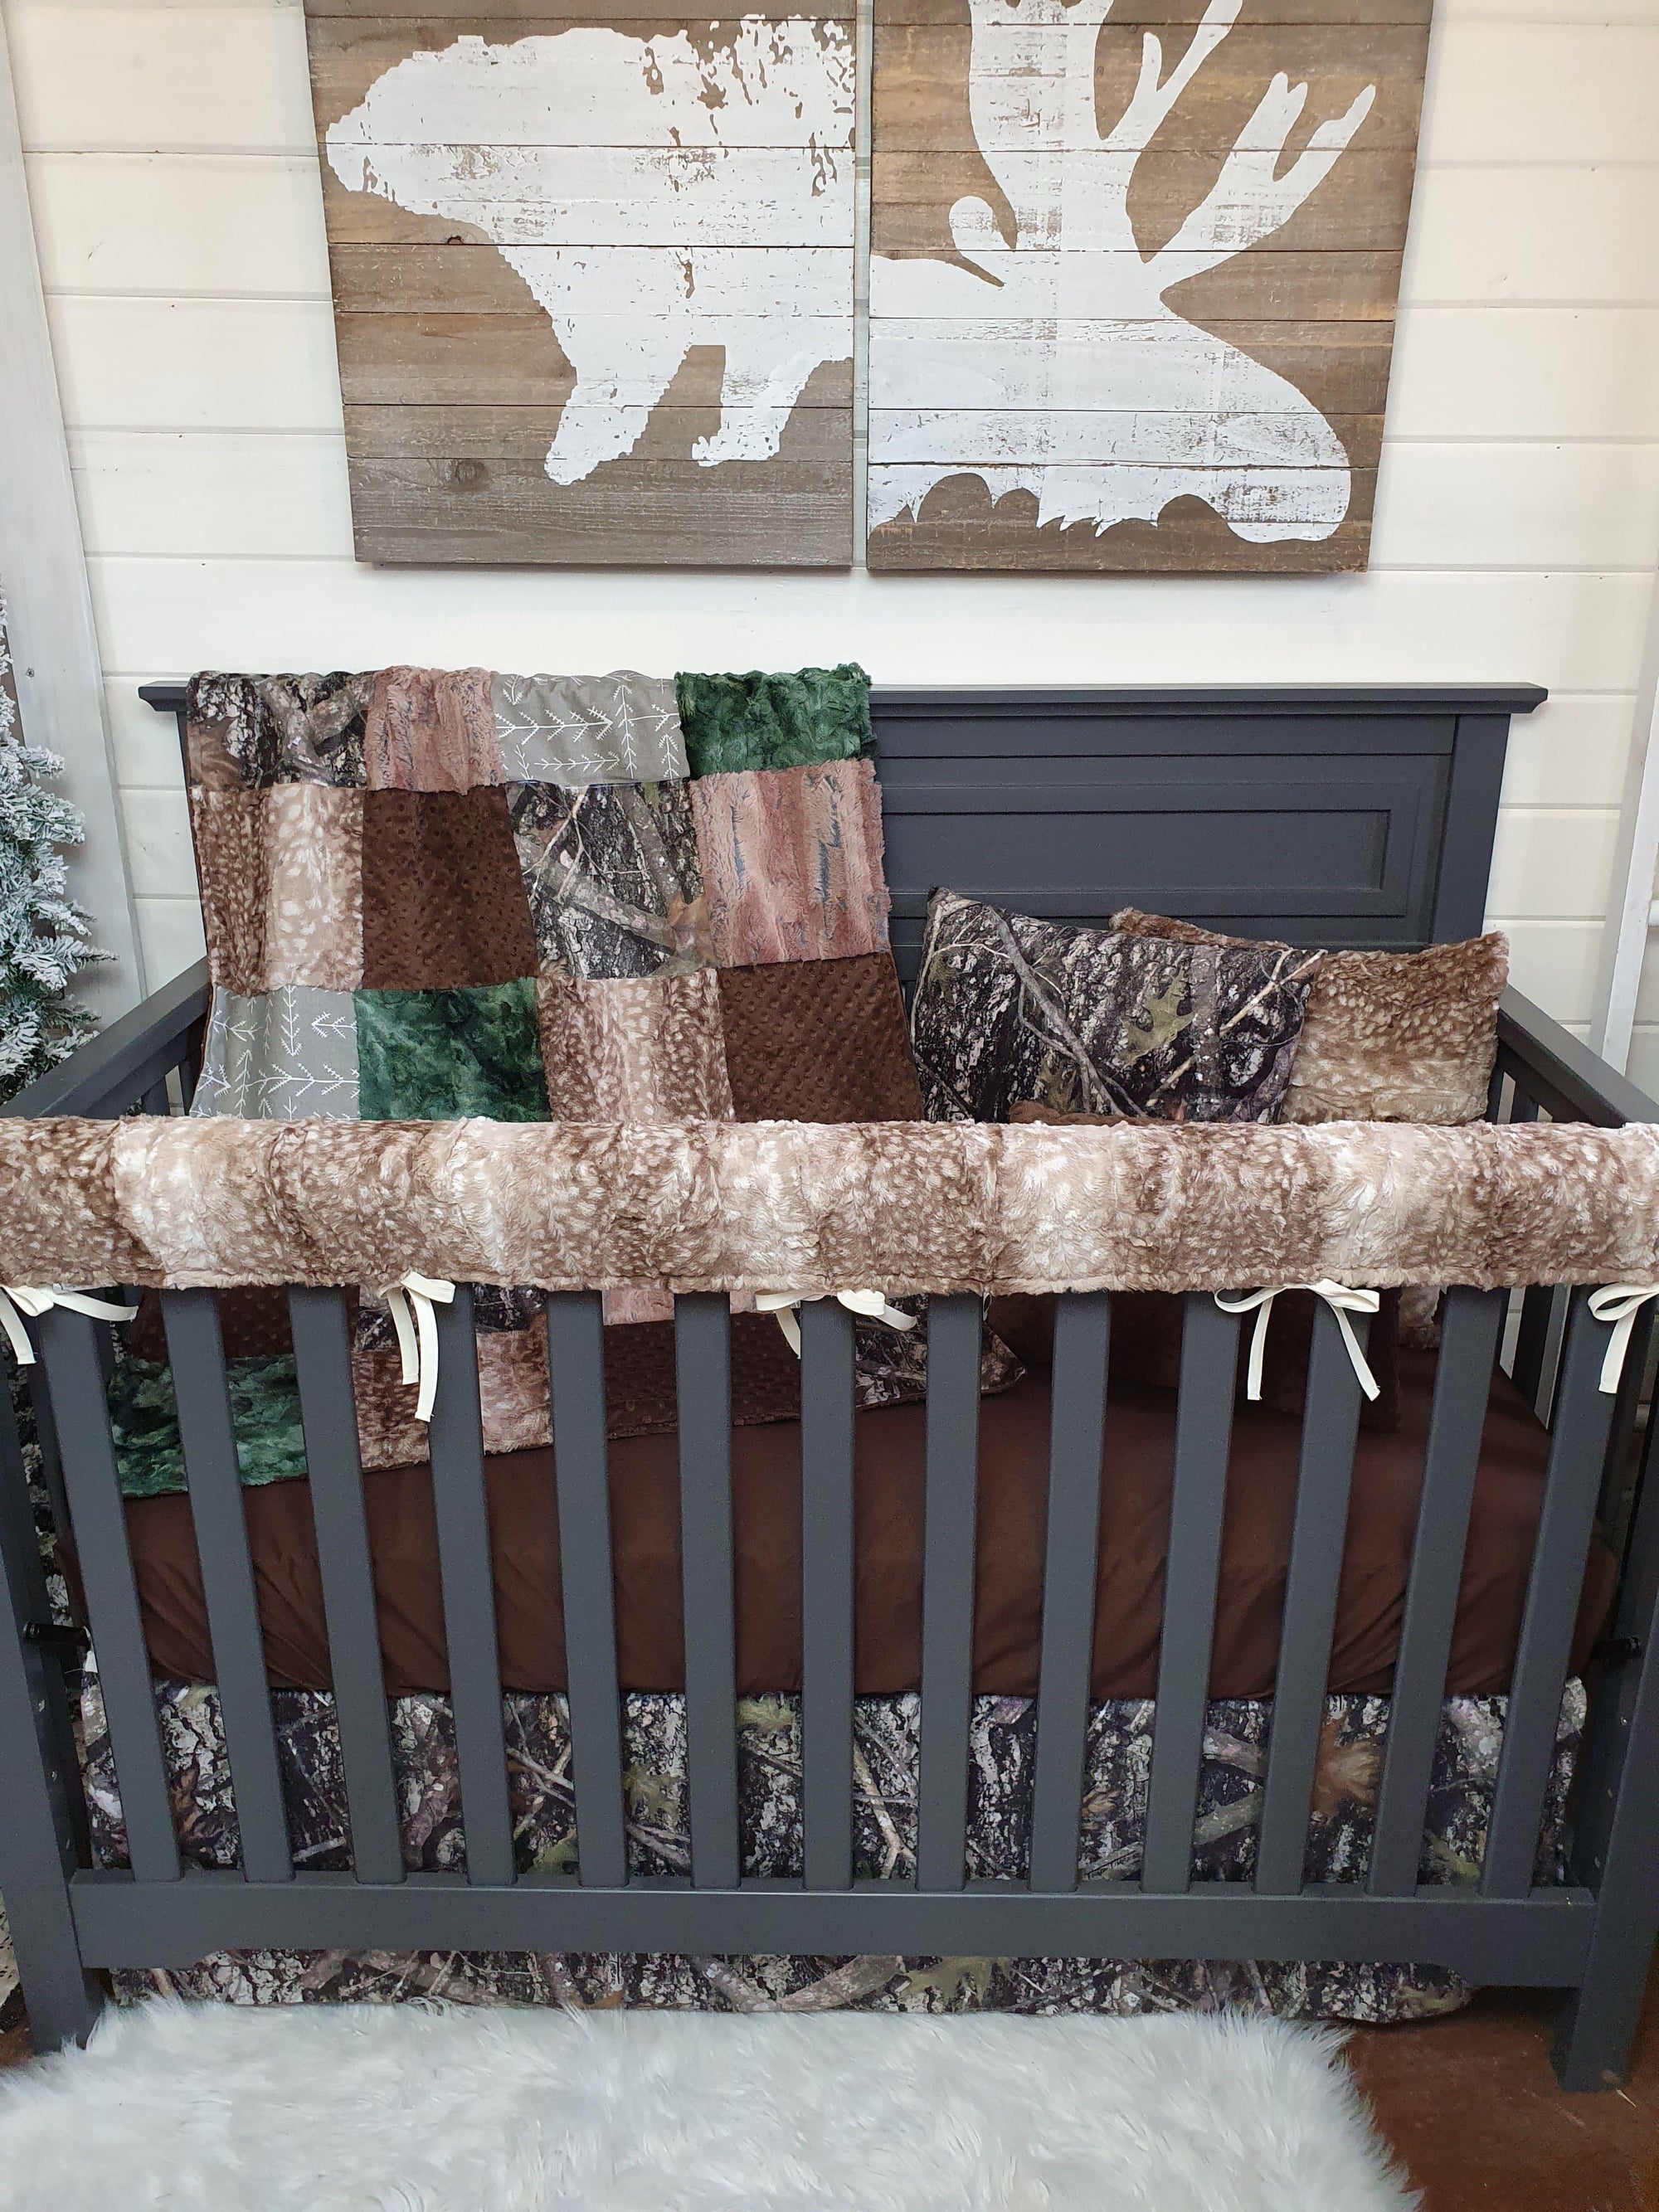 Pink Camo Baby Bedding